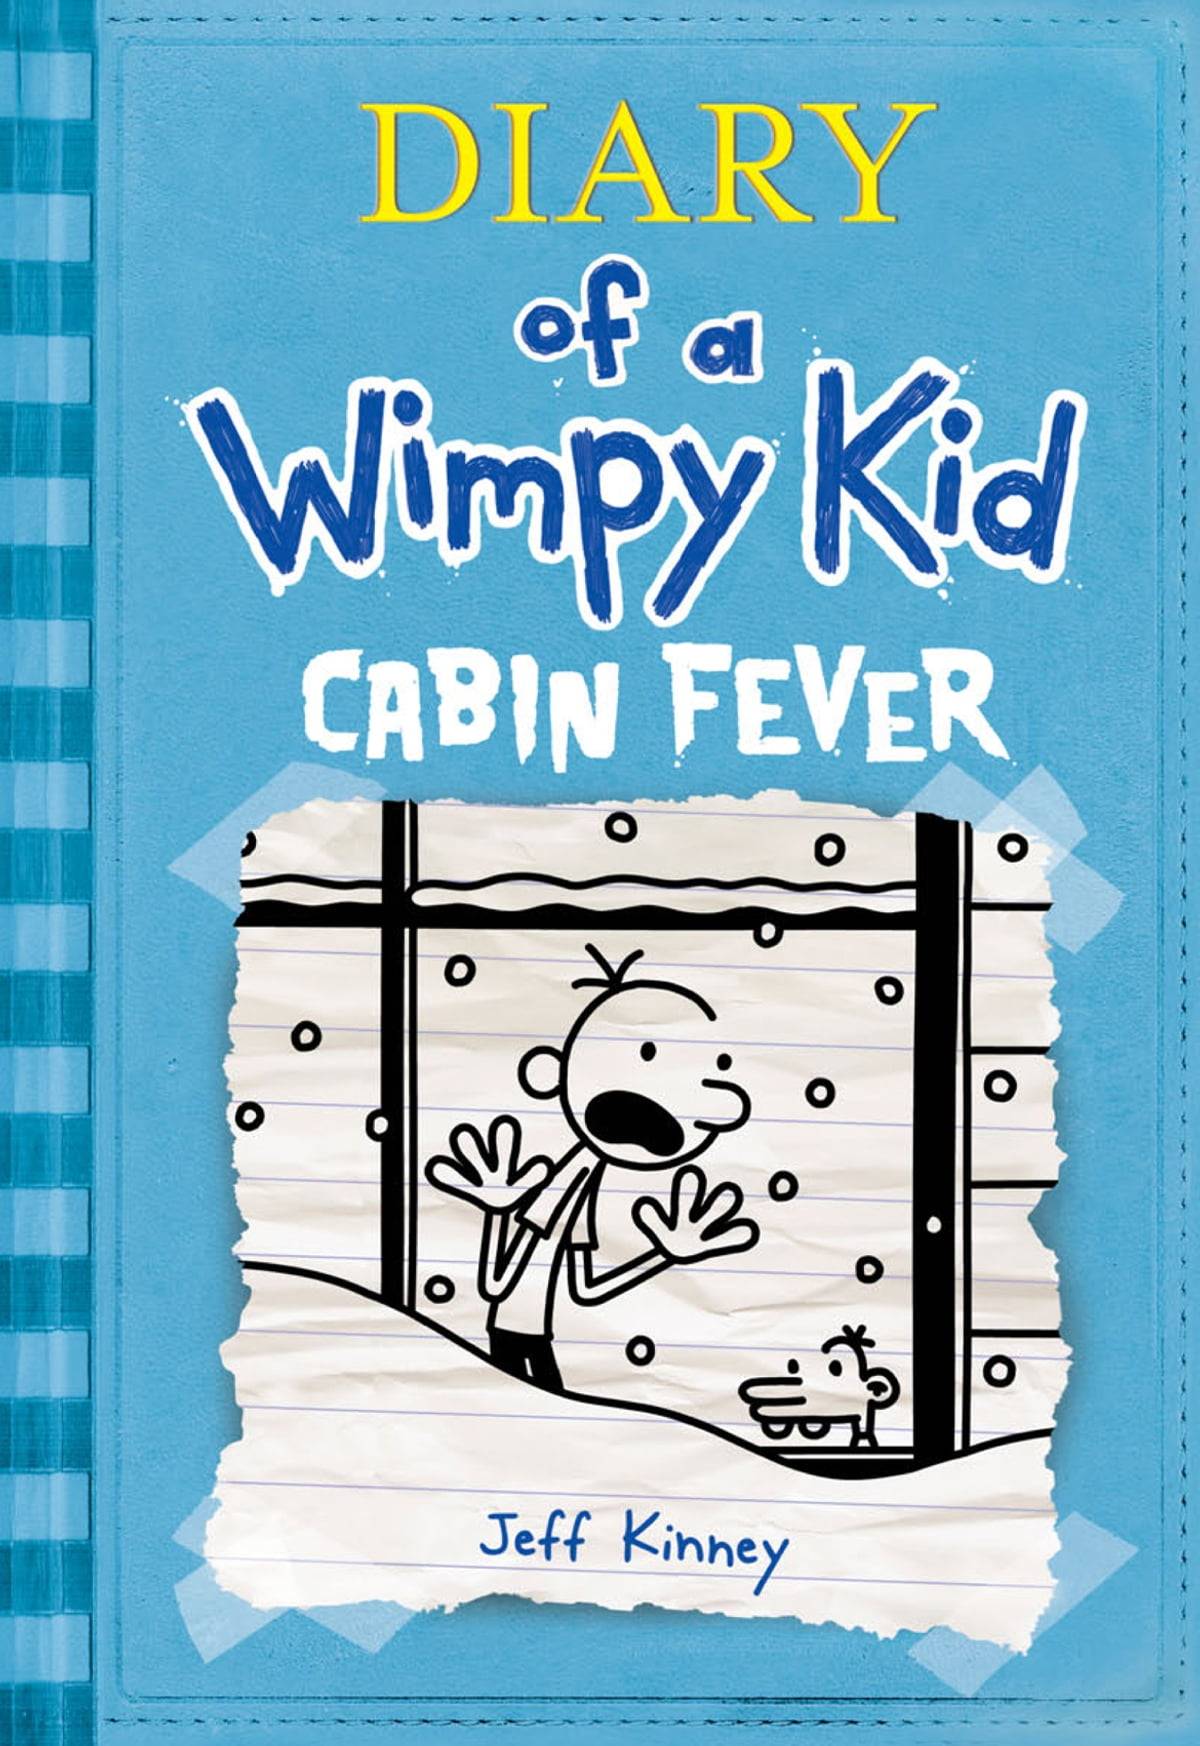 IMG : Wimpy kid- Cabin fever